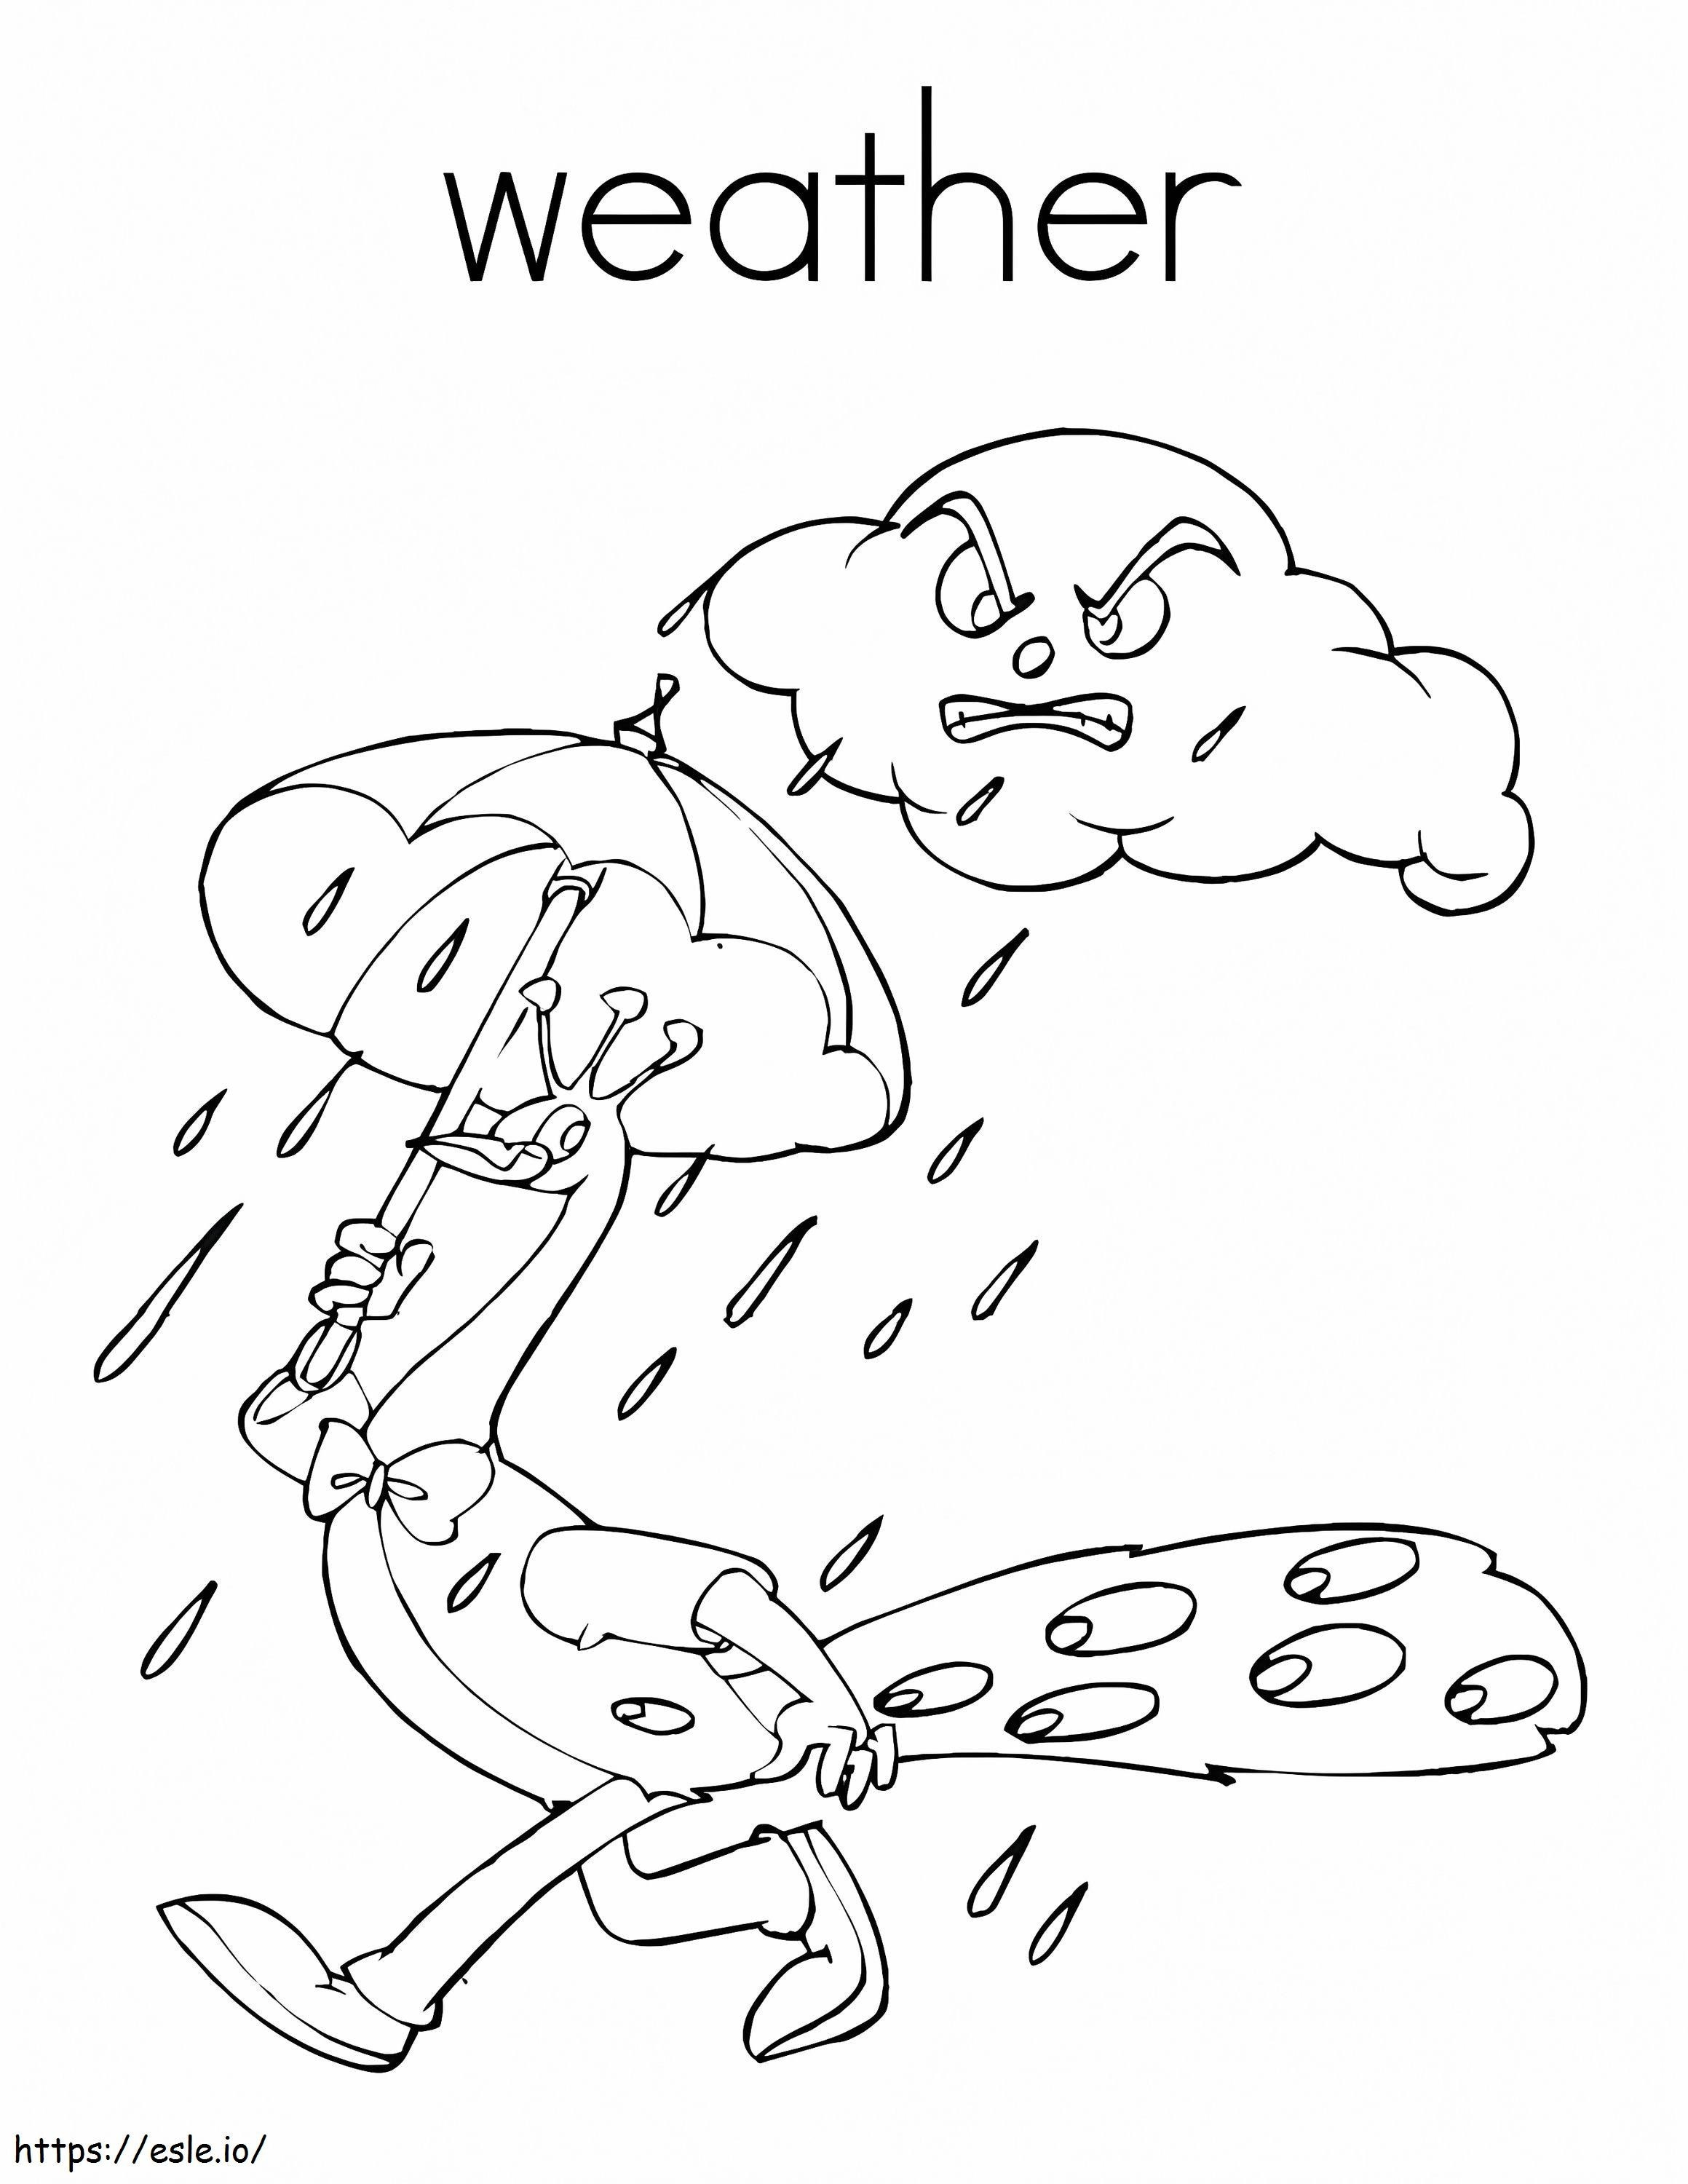 Rain Weather coloring page